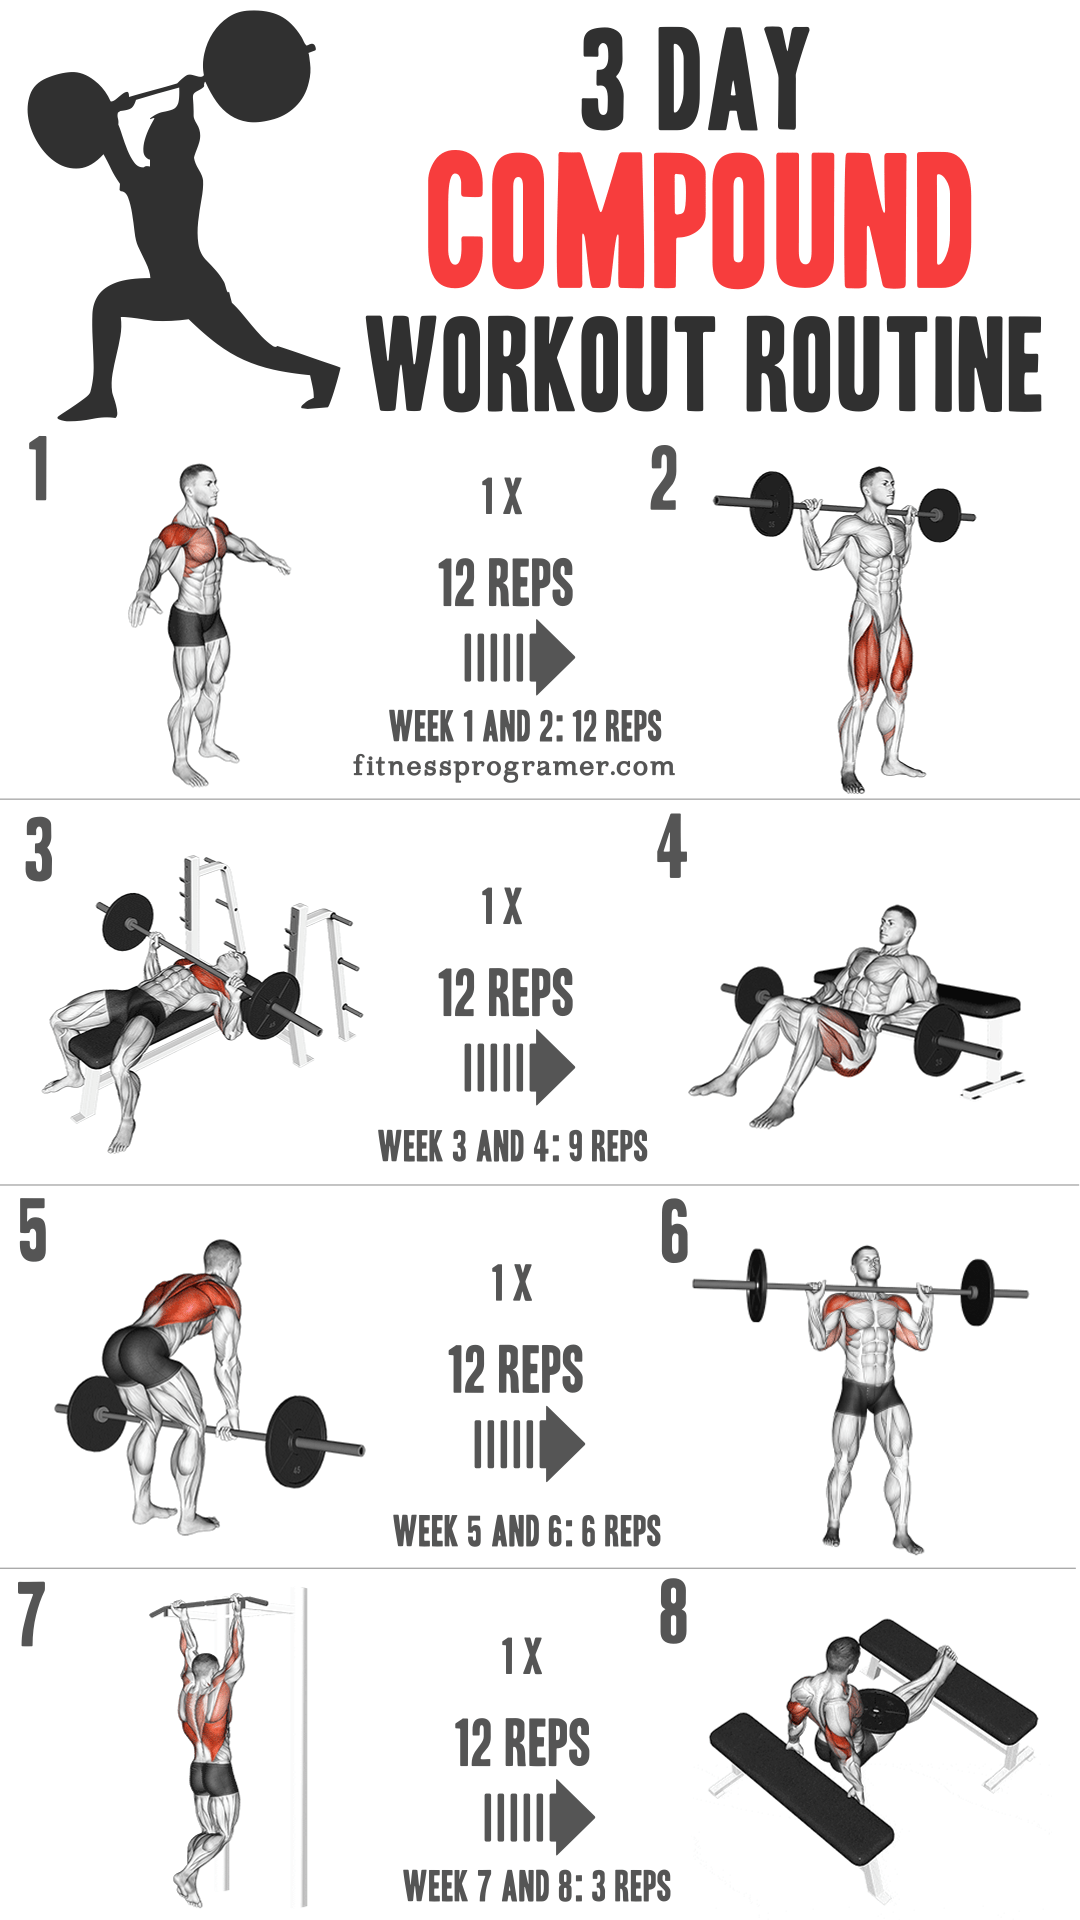 3 day compound workout routine 2